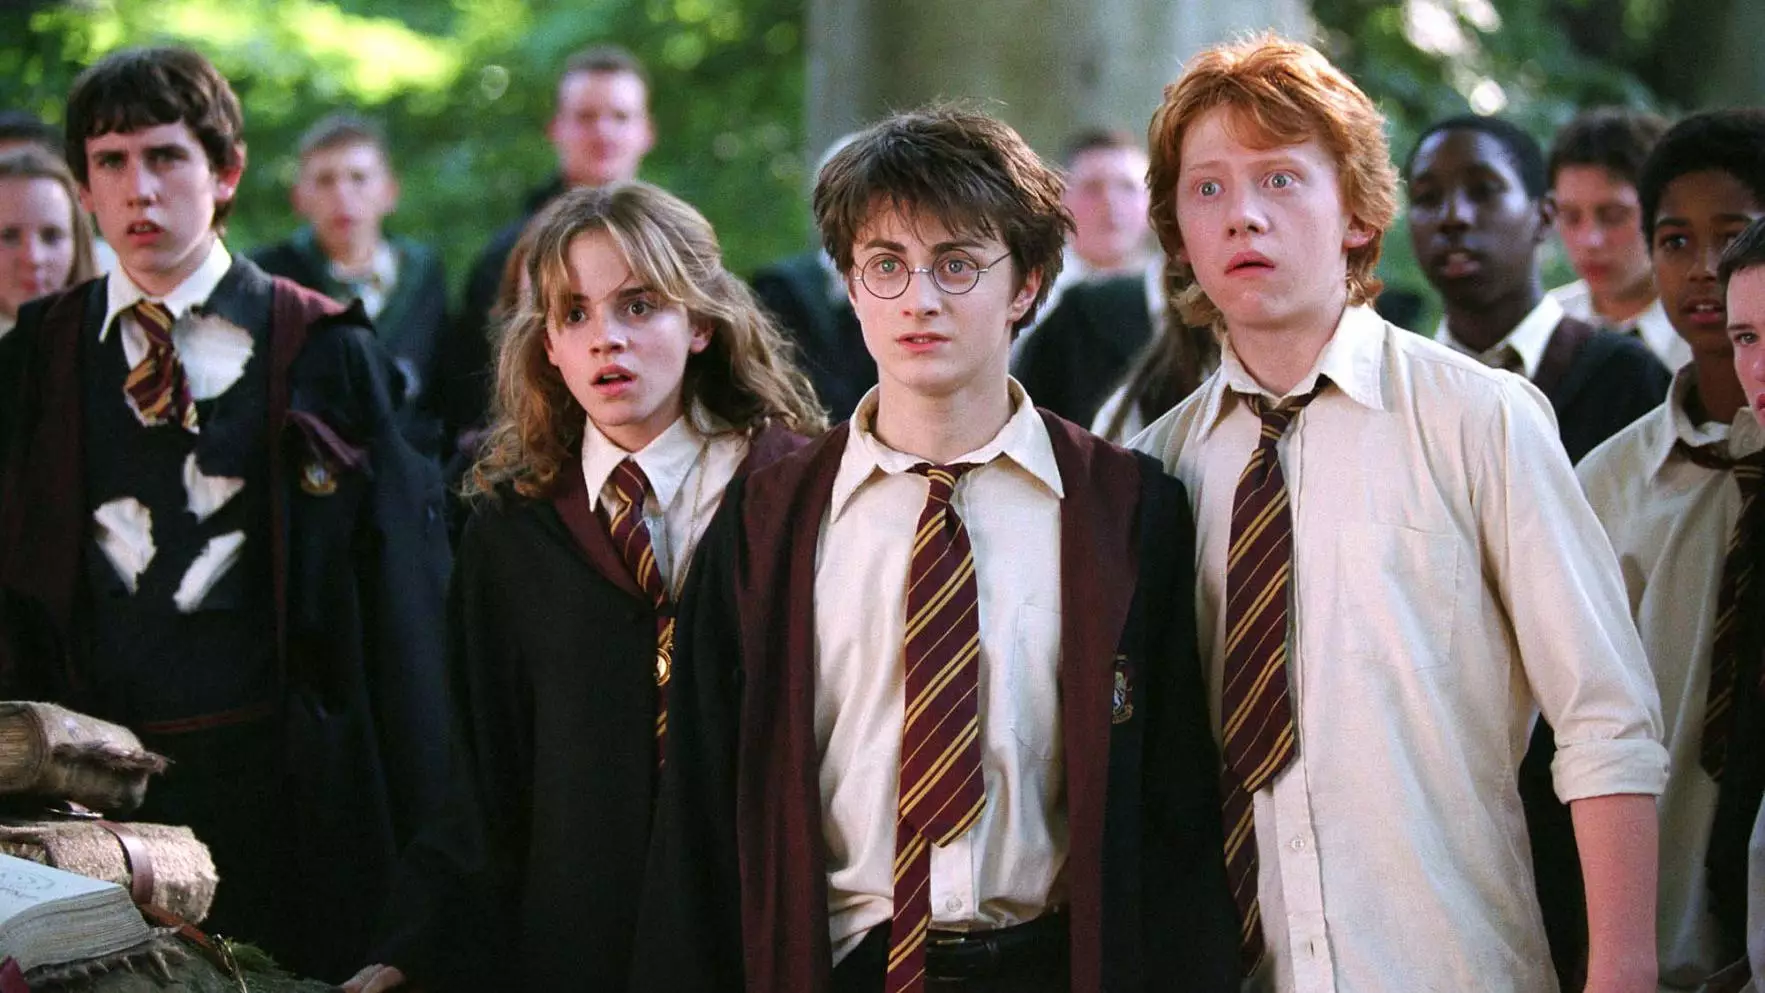 Harry, Ron and Hermione have no further adventures planned (